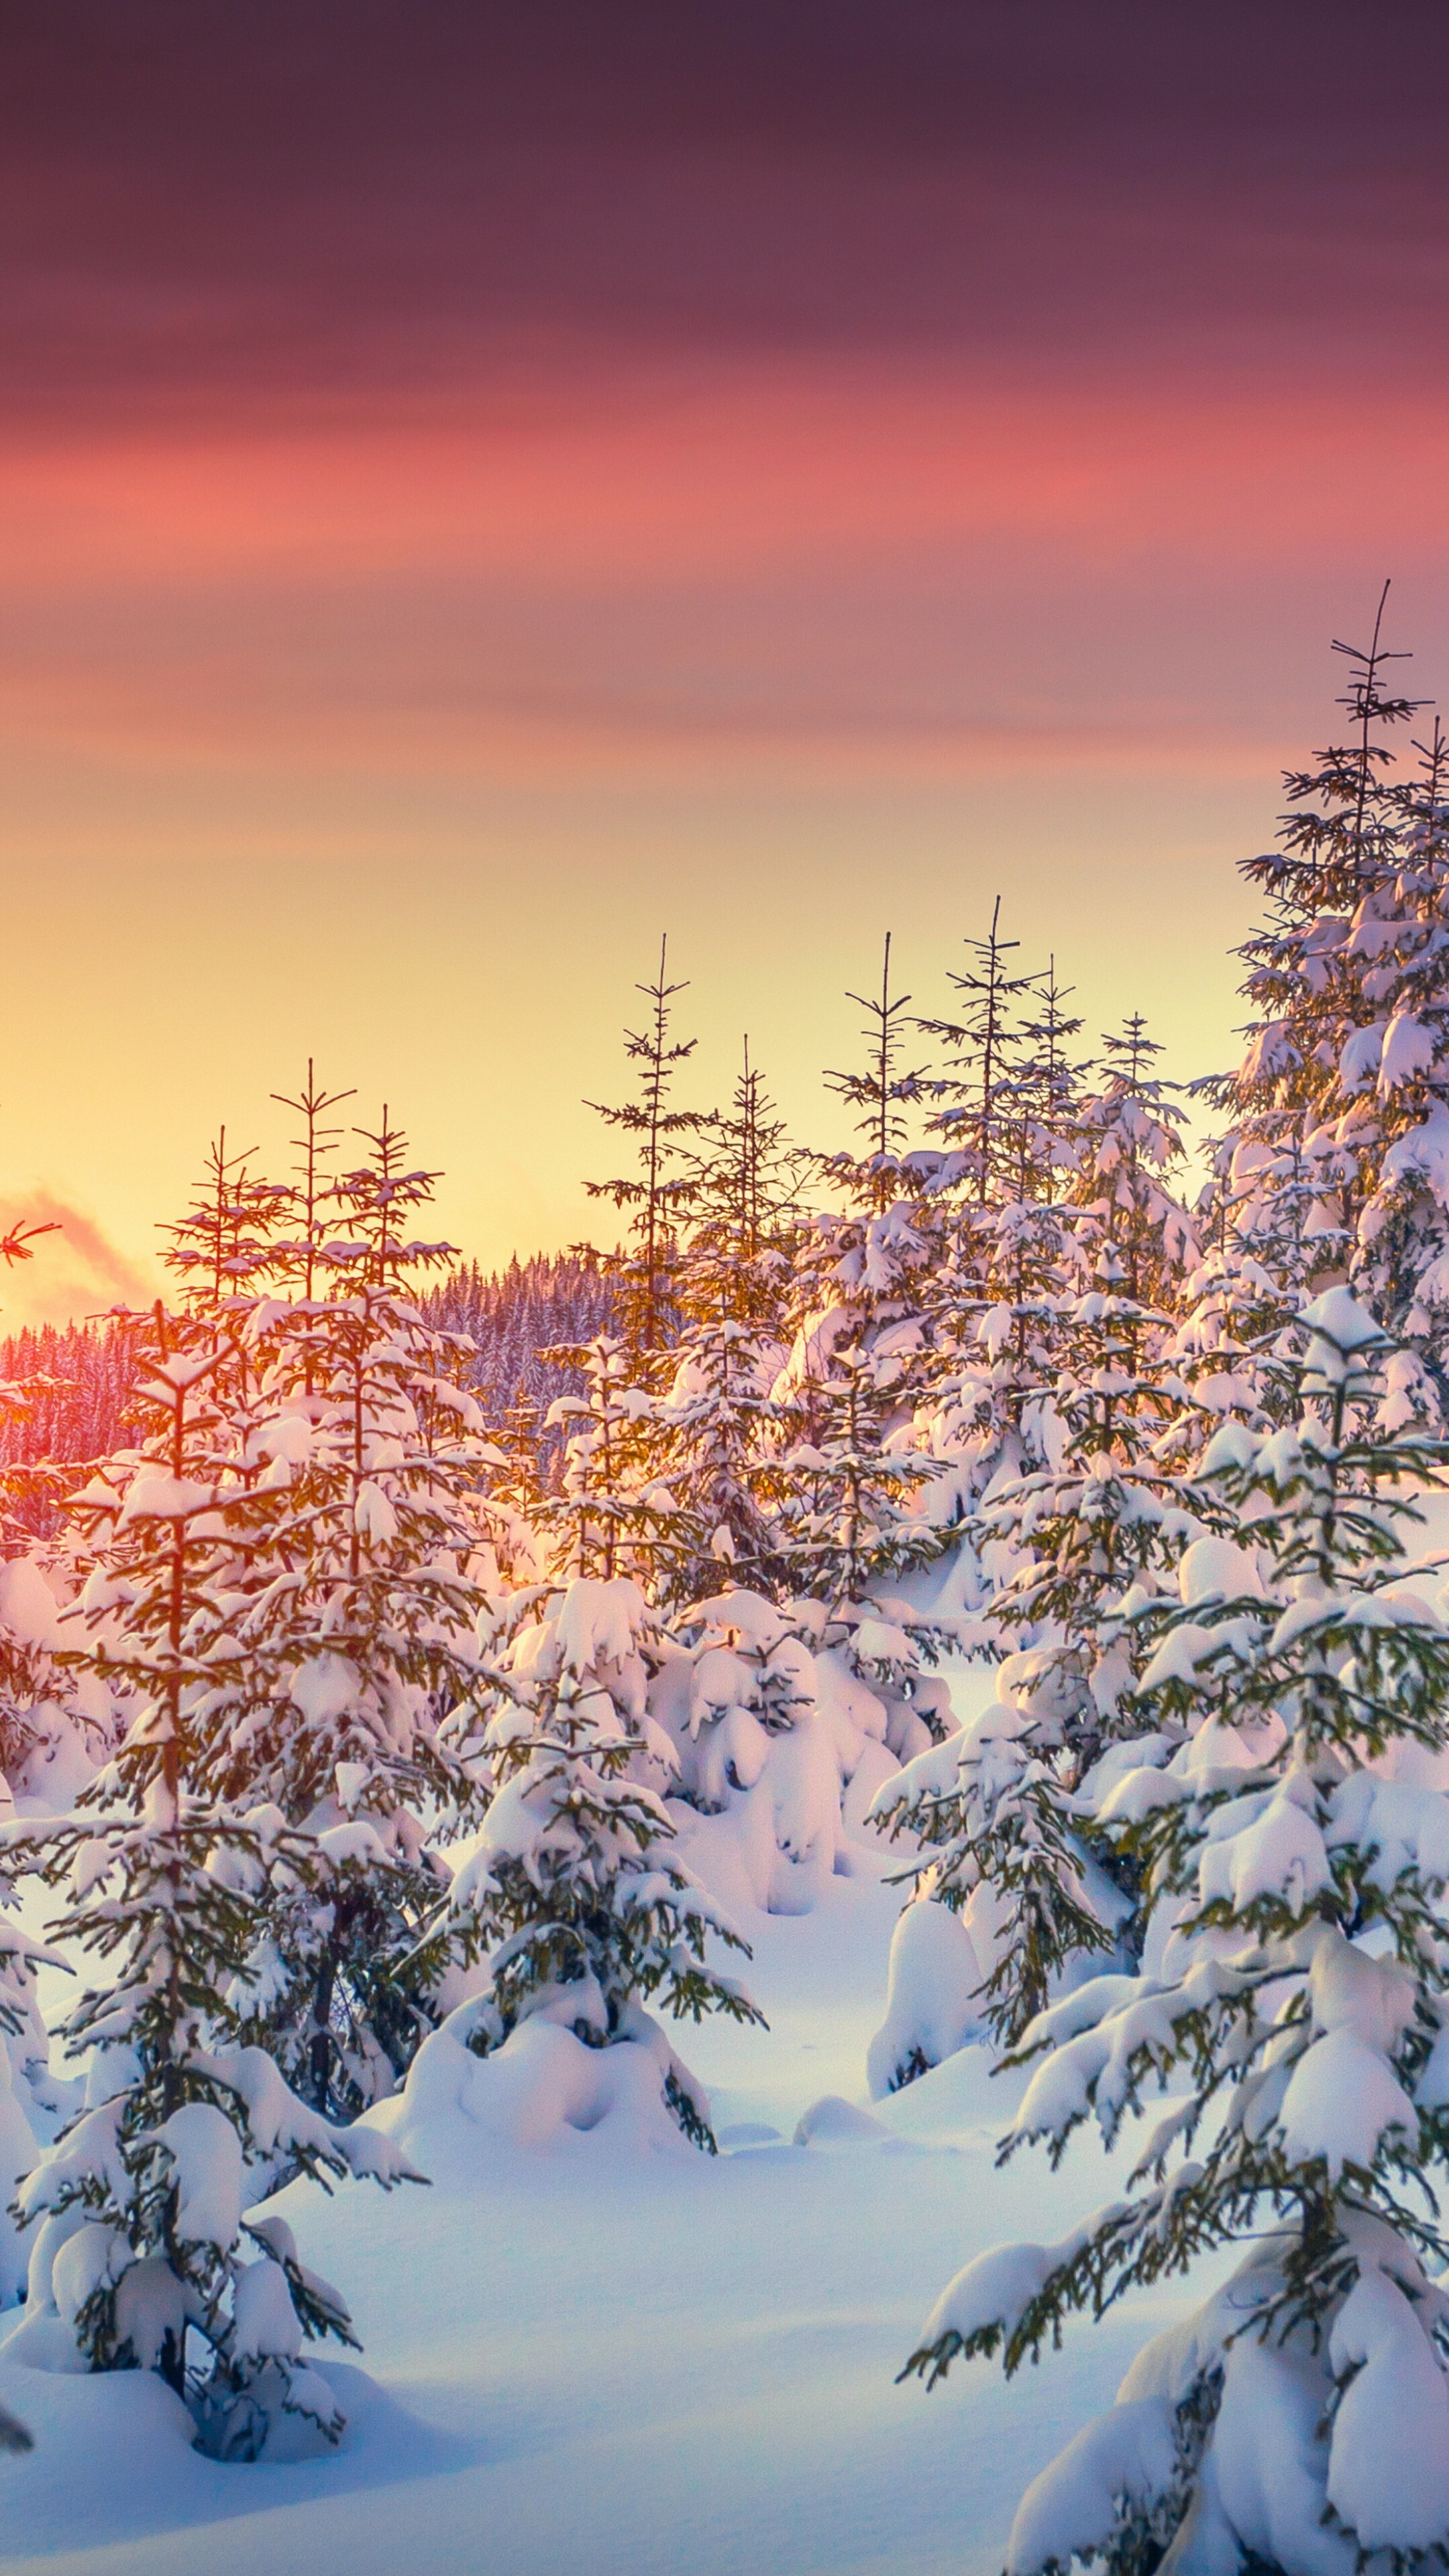 Winter: Season associated with plunging temperatures and icy weather, Snowy pines. 2160x3840 4K Wallpaper.